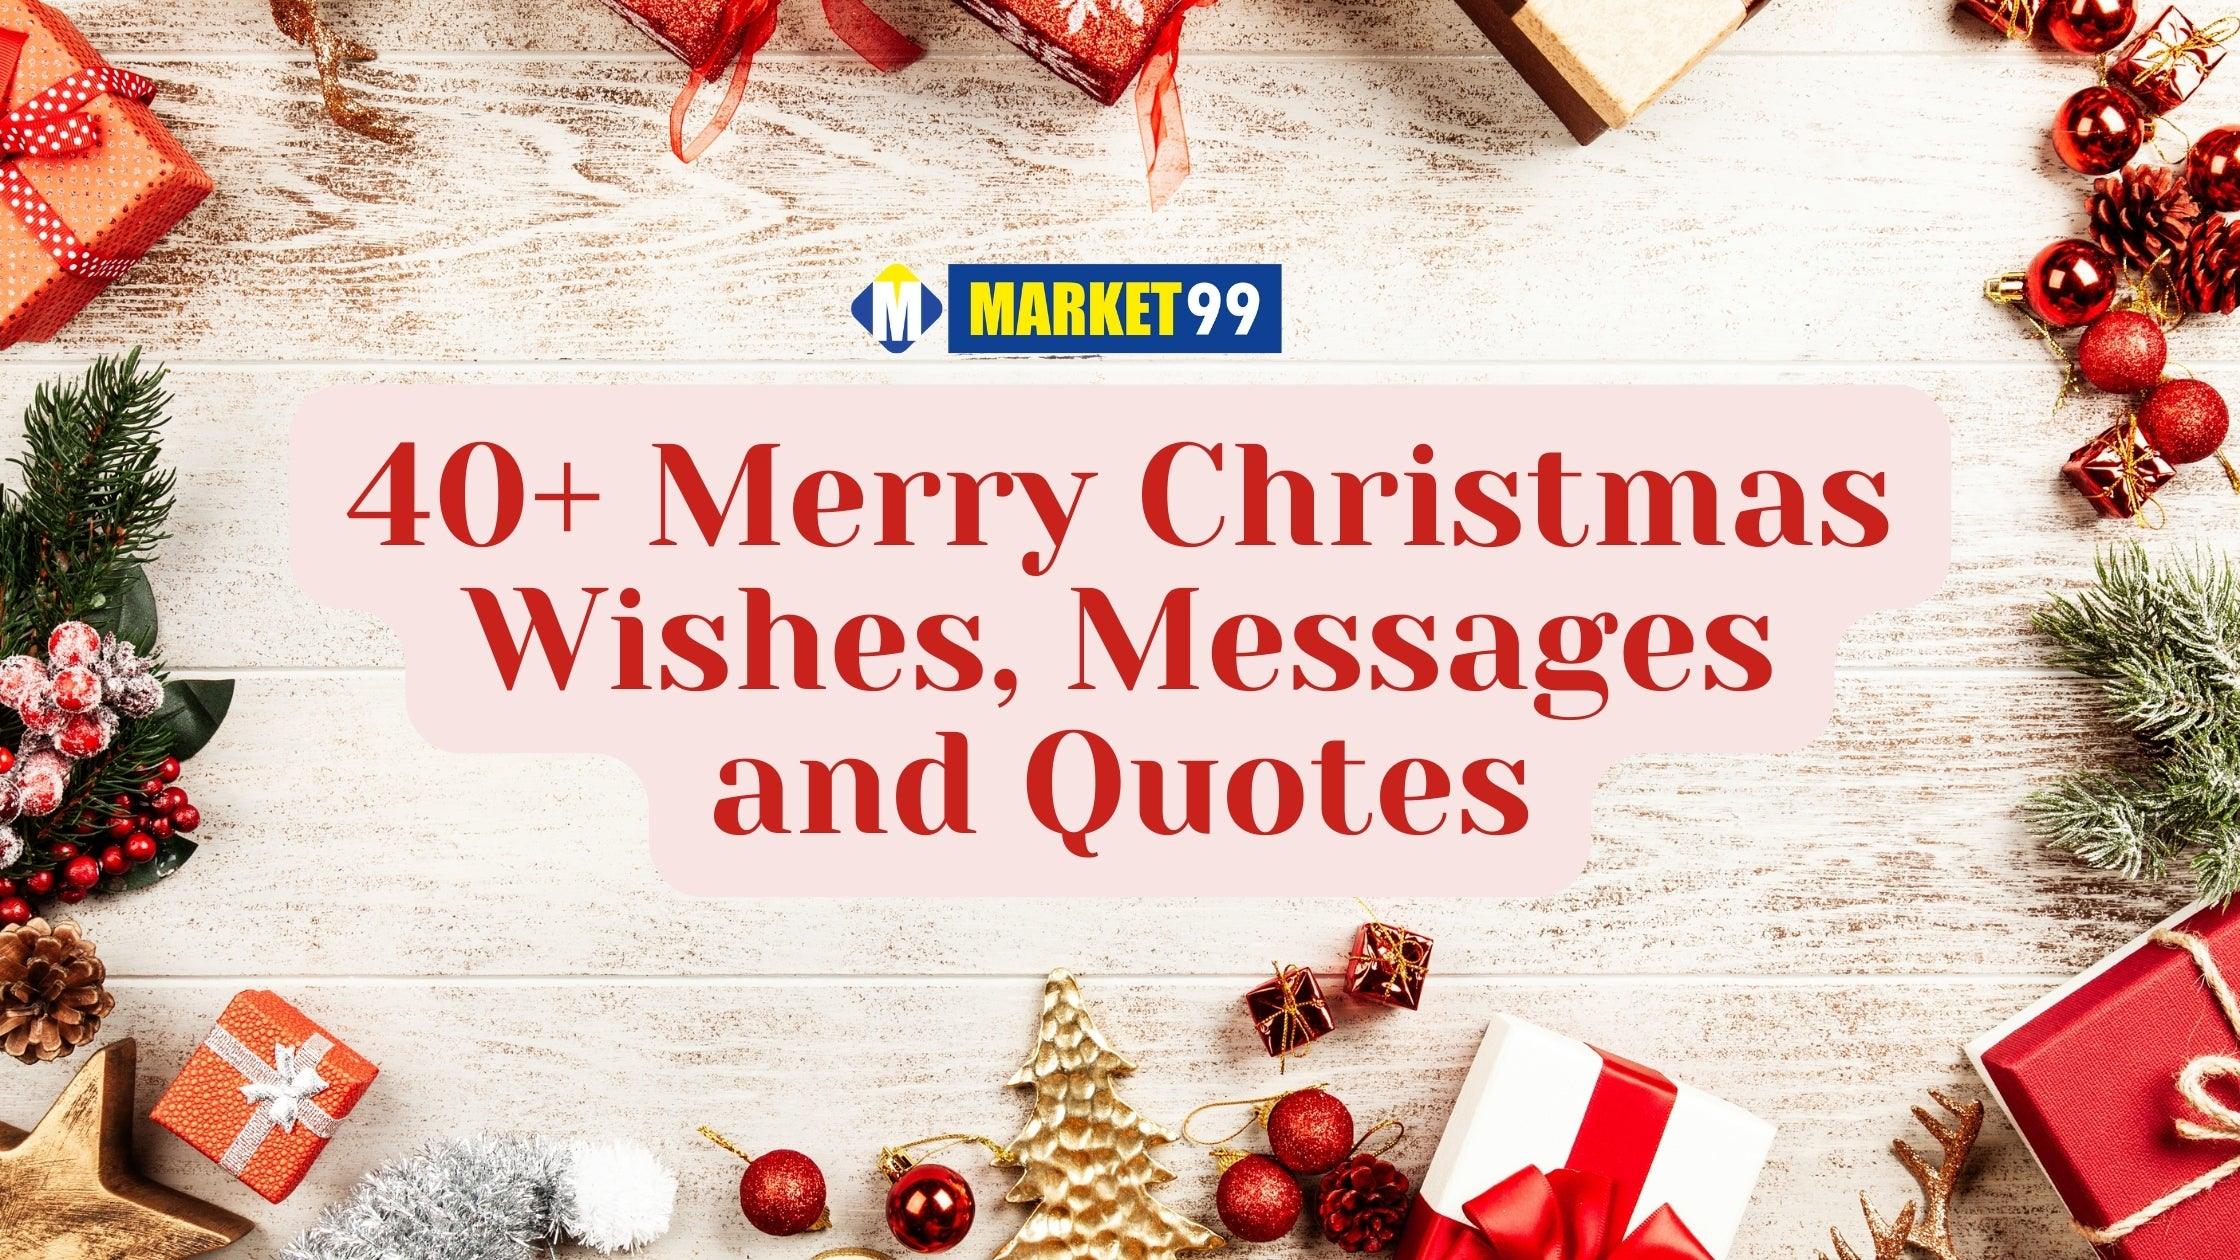 40+ Merry Christmas Wishes, Messages and Quotes - Market99